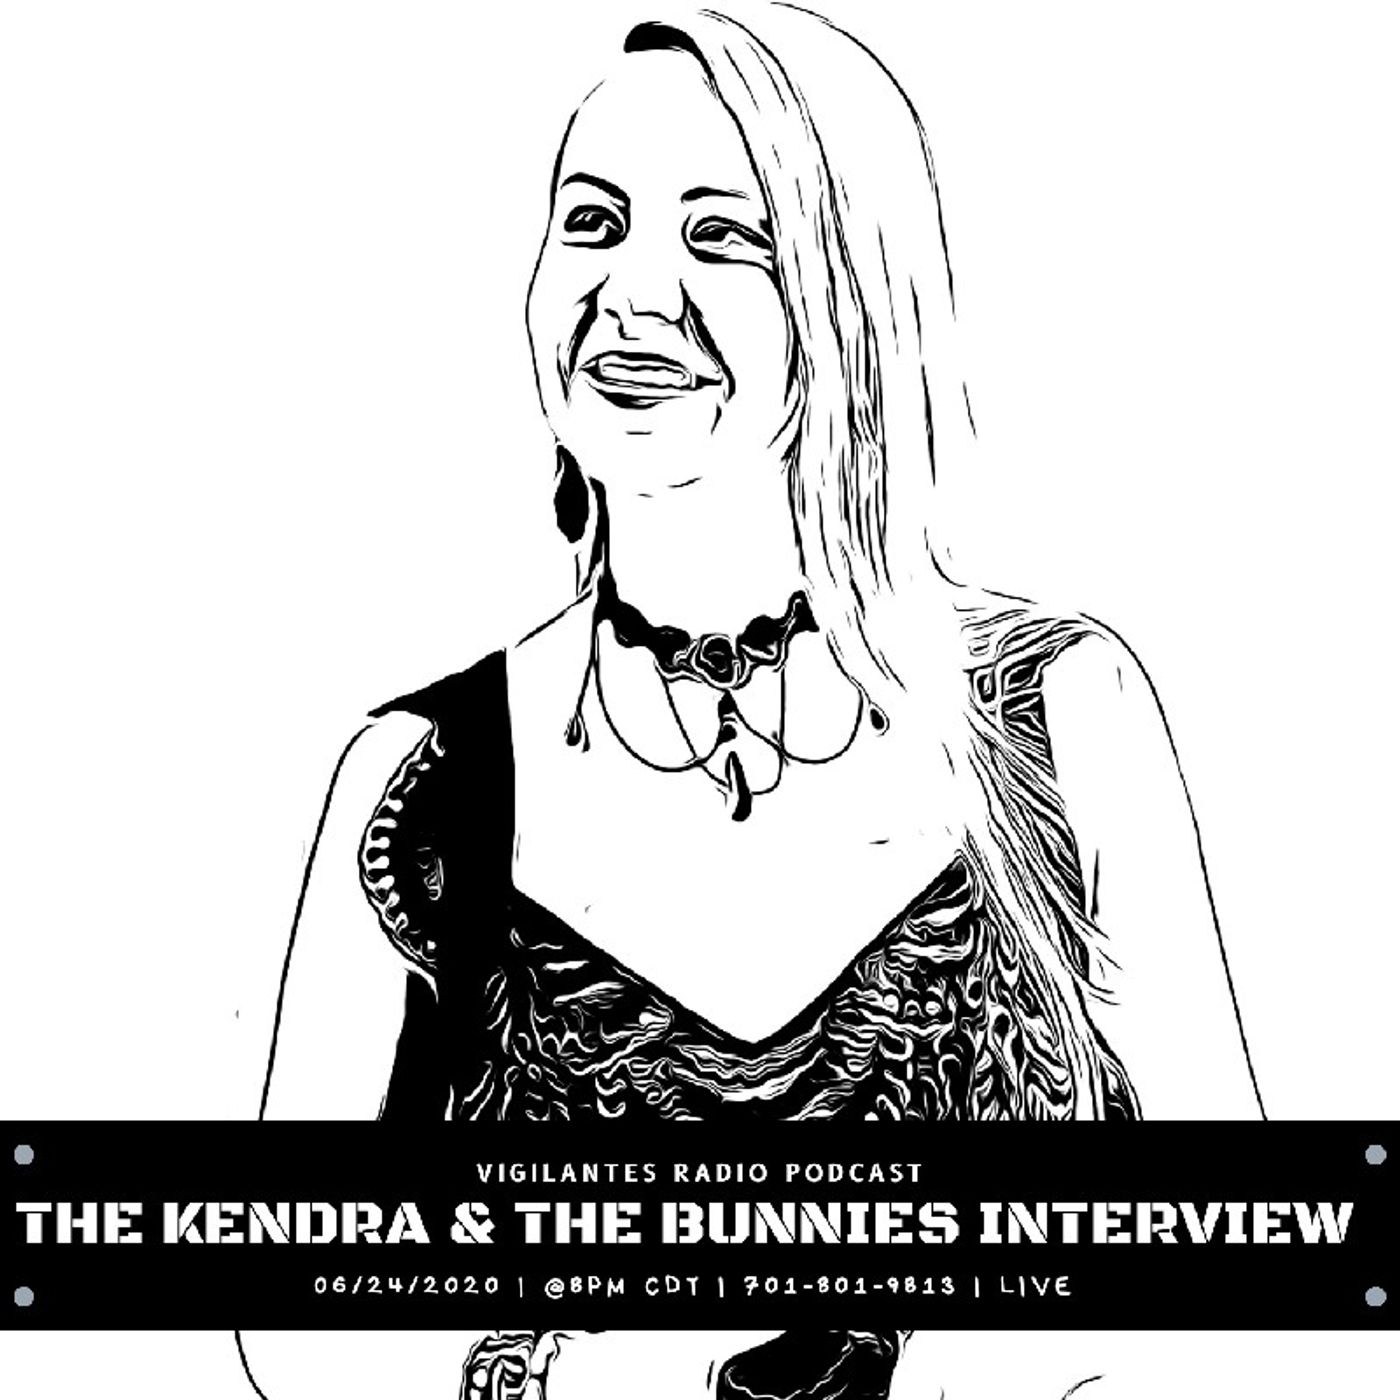 The Kendra & The Bunnies Interview. Image